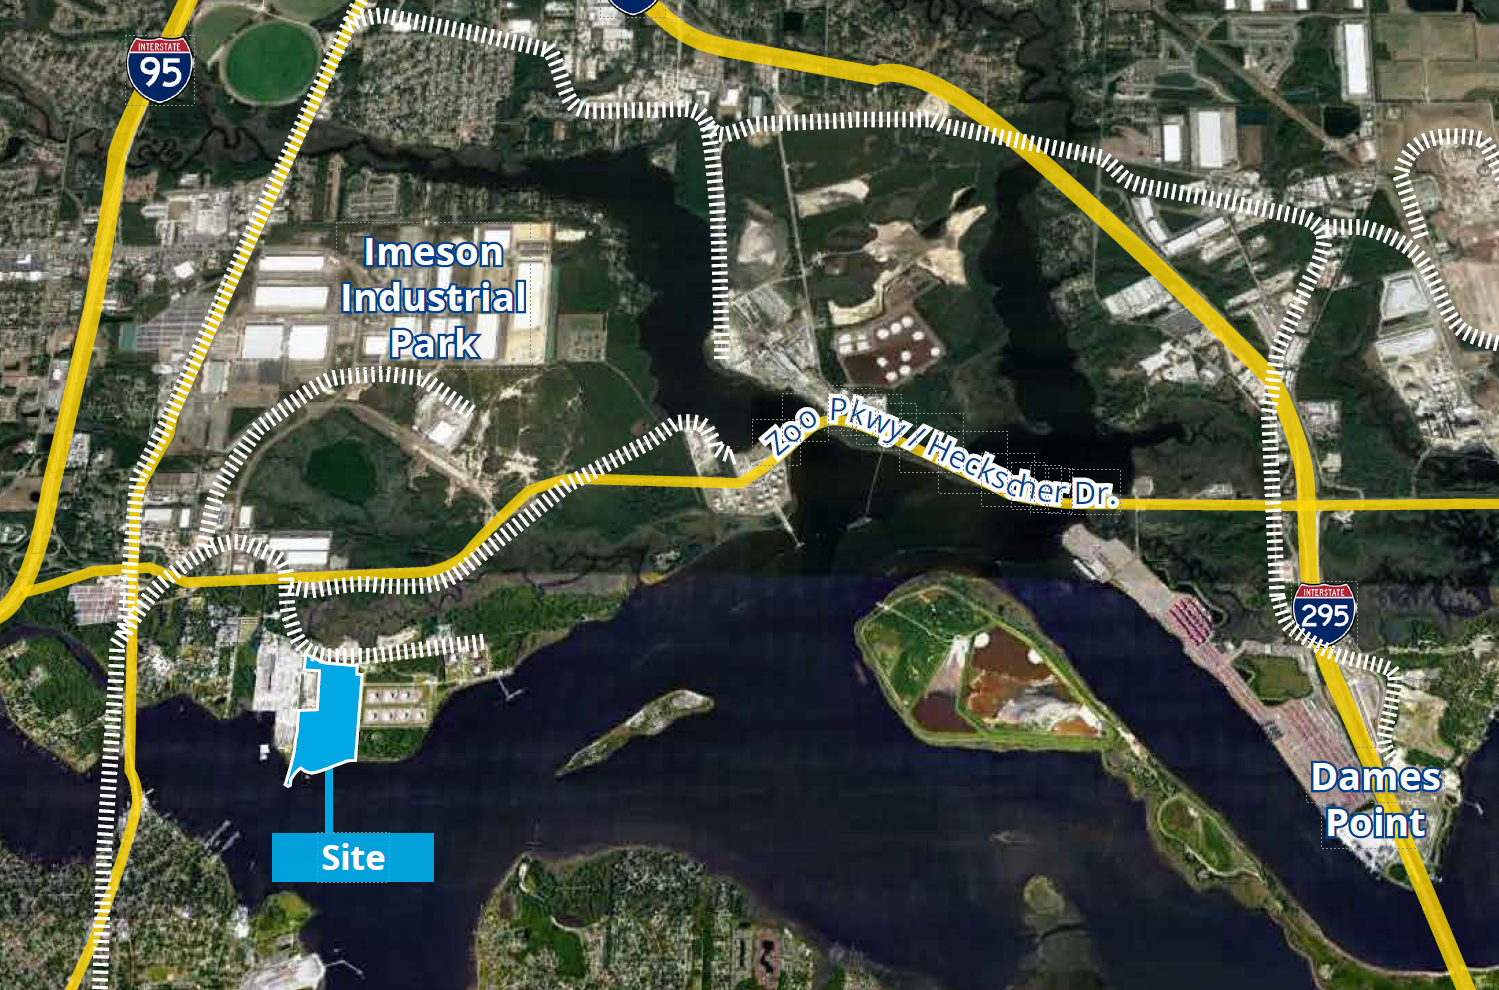 The site is on Somers Road near the JaxPort Talleyrand and Dames Point marine terminals.